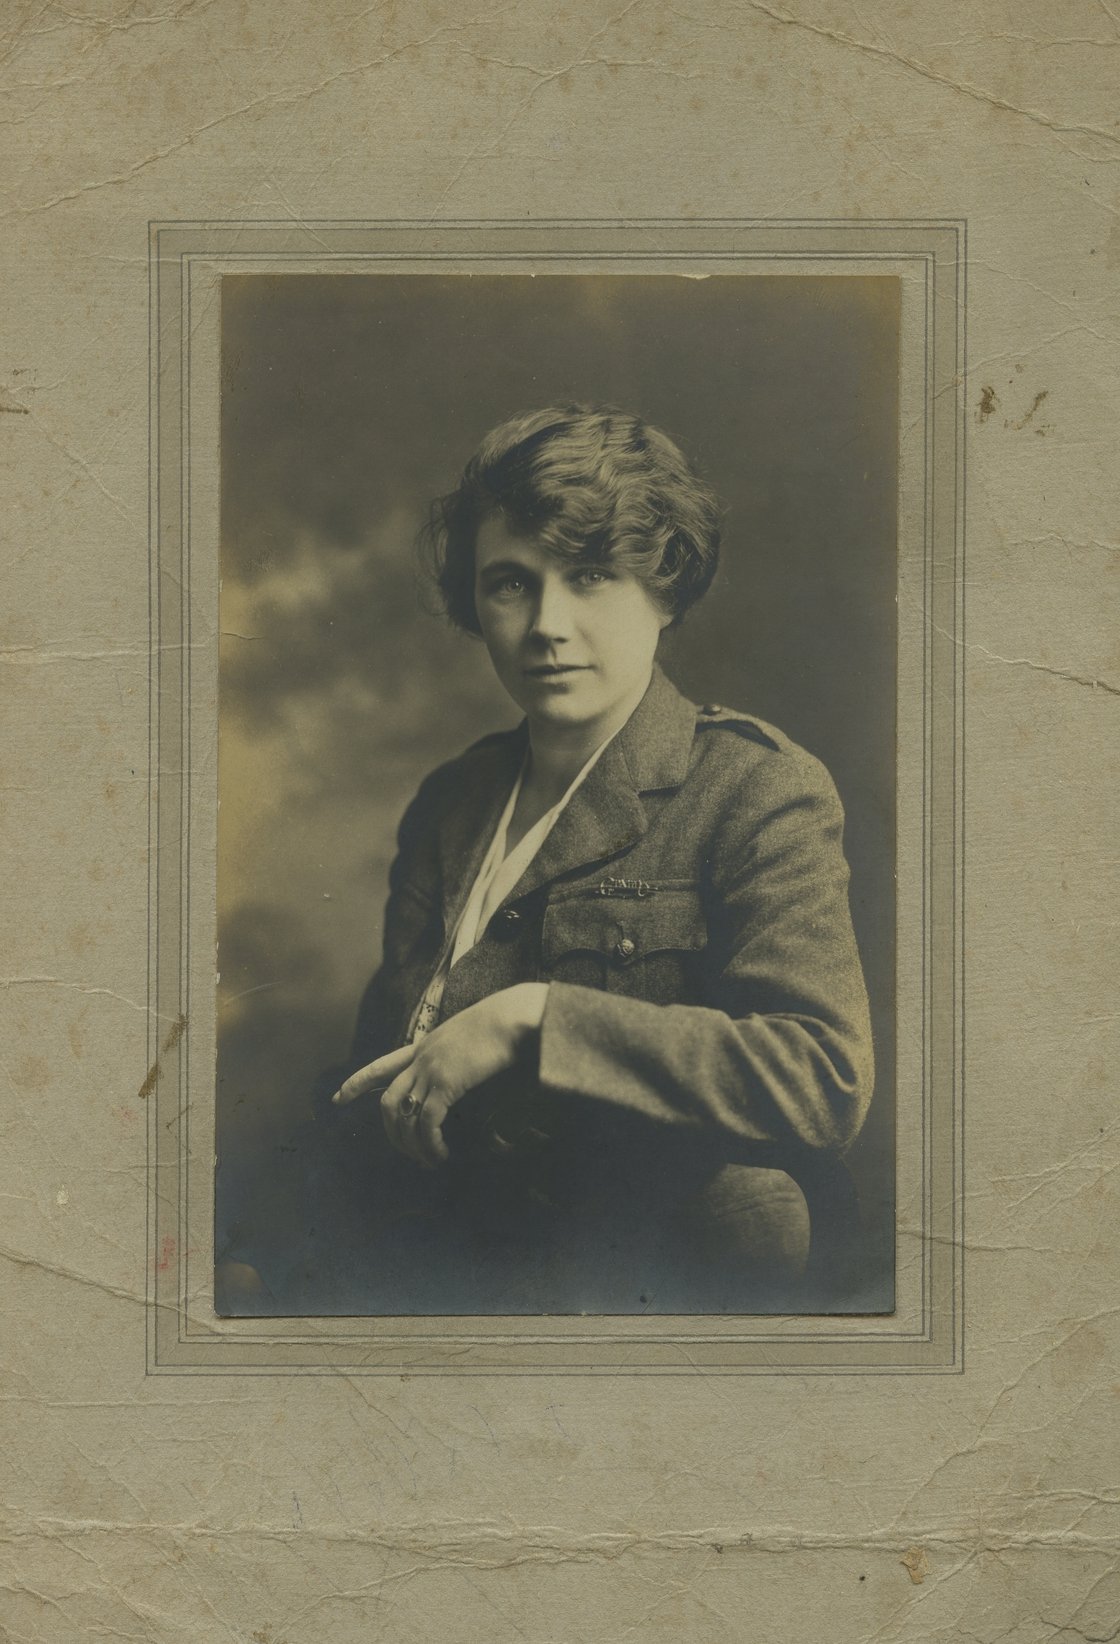 Image - Cumann na mBan member Kay Gibney in her 19PO-1A22-27